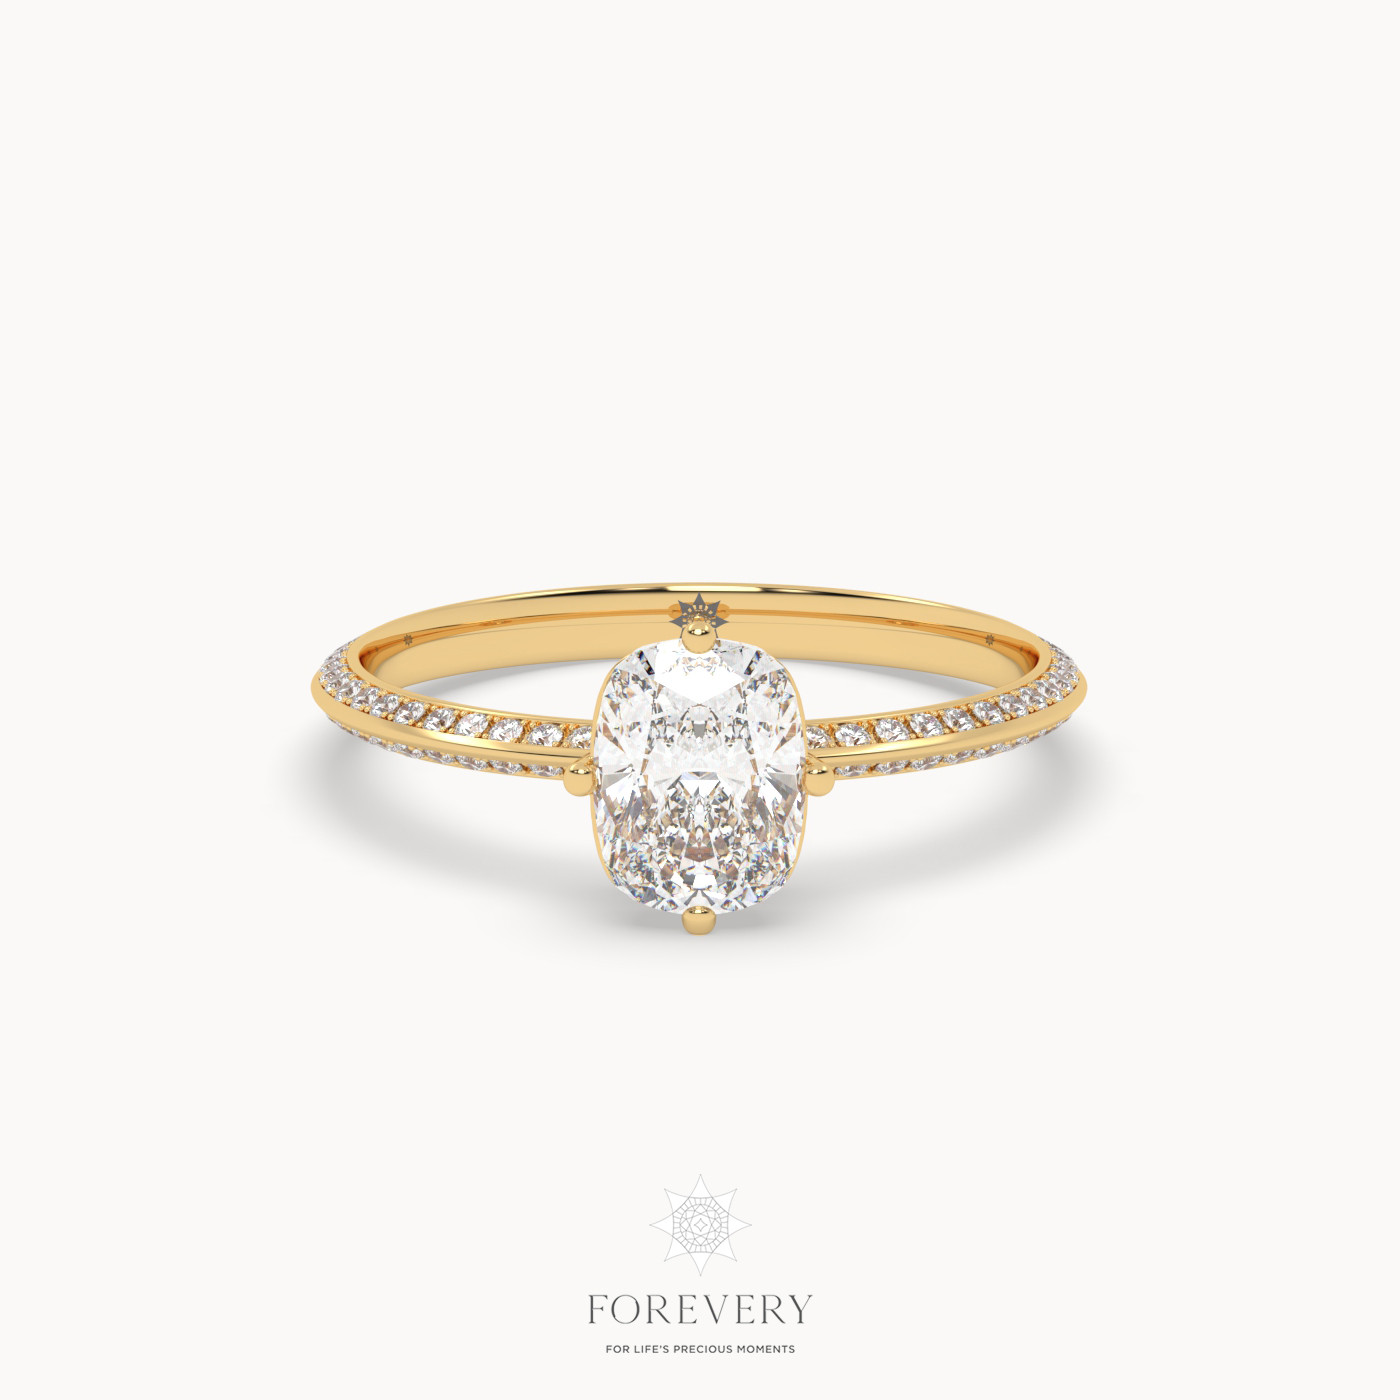 18K YELLOW GOLD Cushion Cut Diamond Engagement Ring with Pave Band